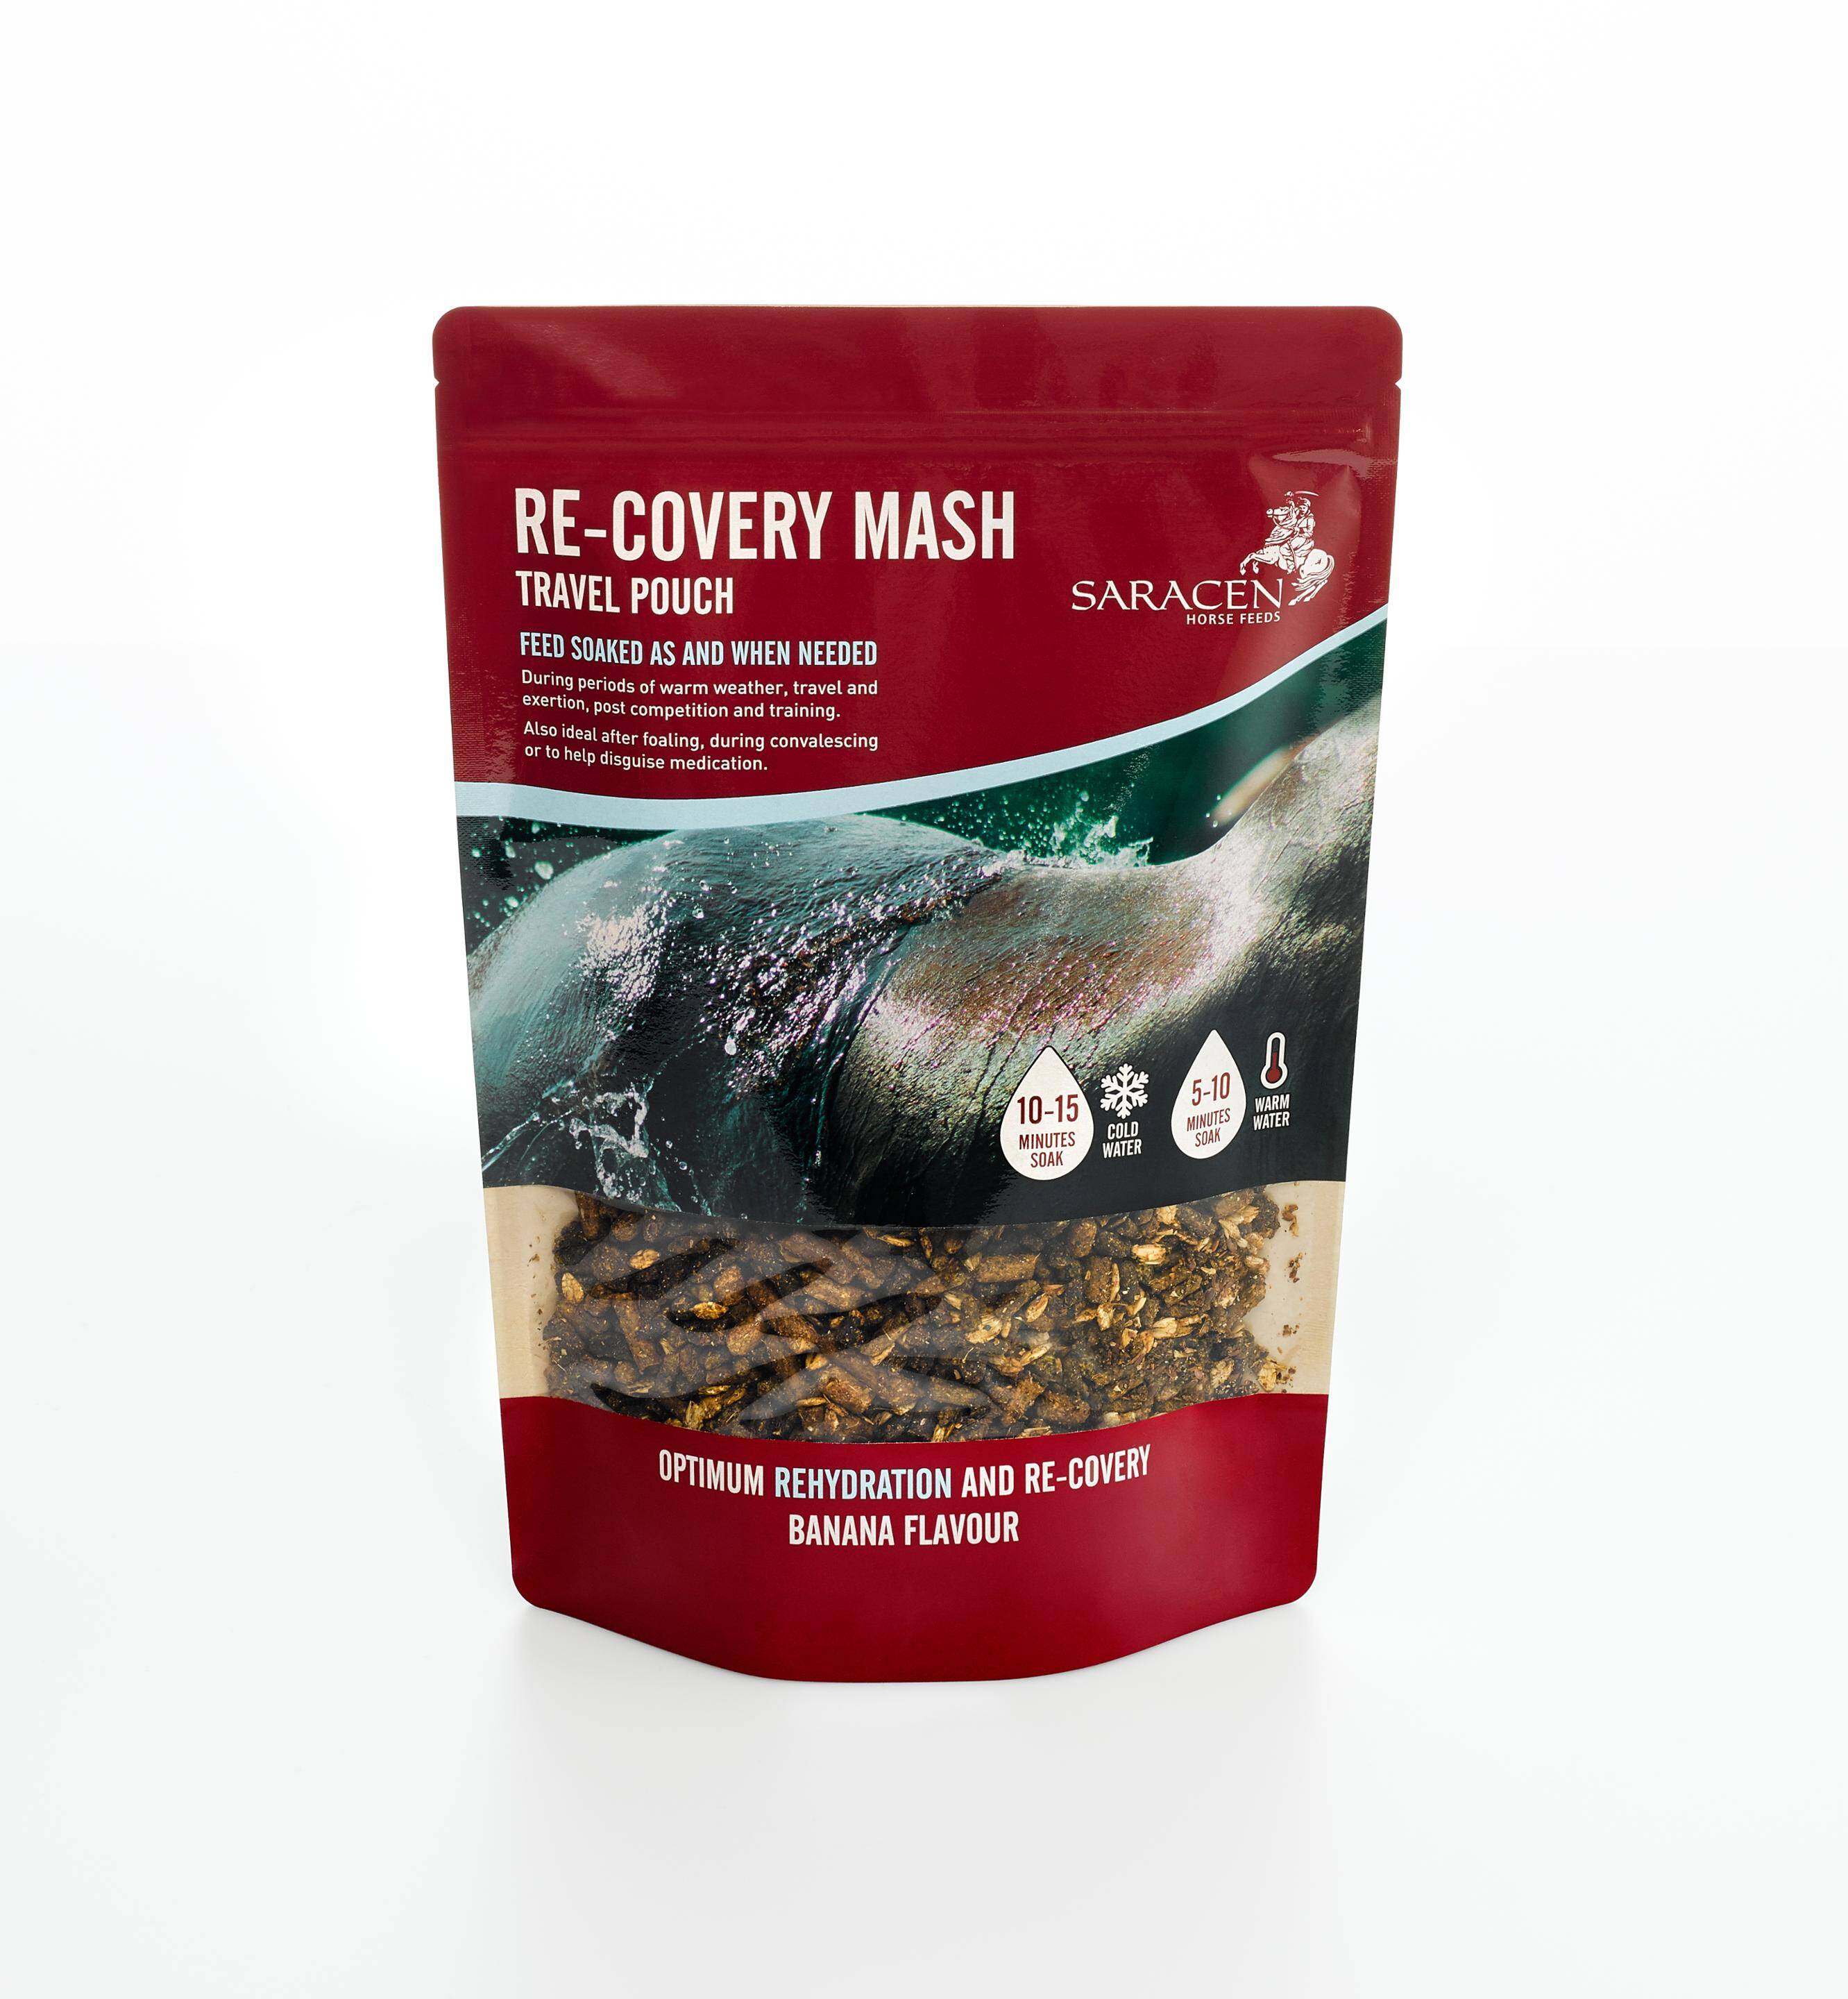 Saracen Re-covery Mash 1,5kg Travel Pouch